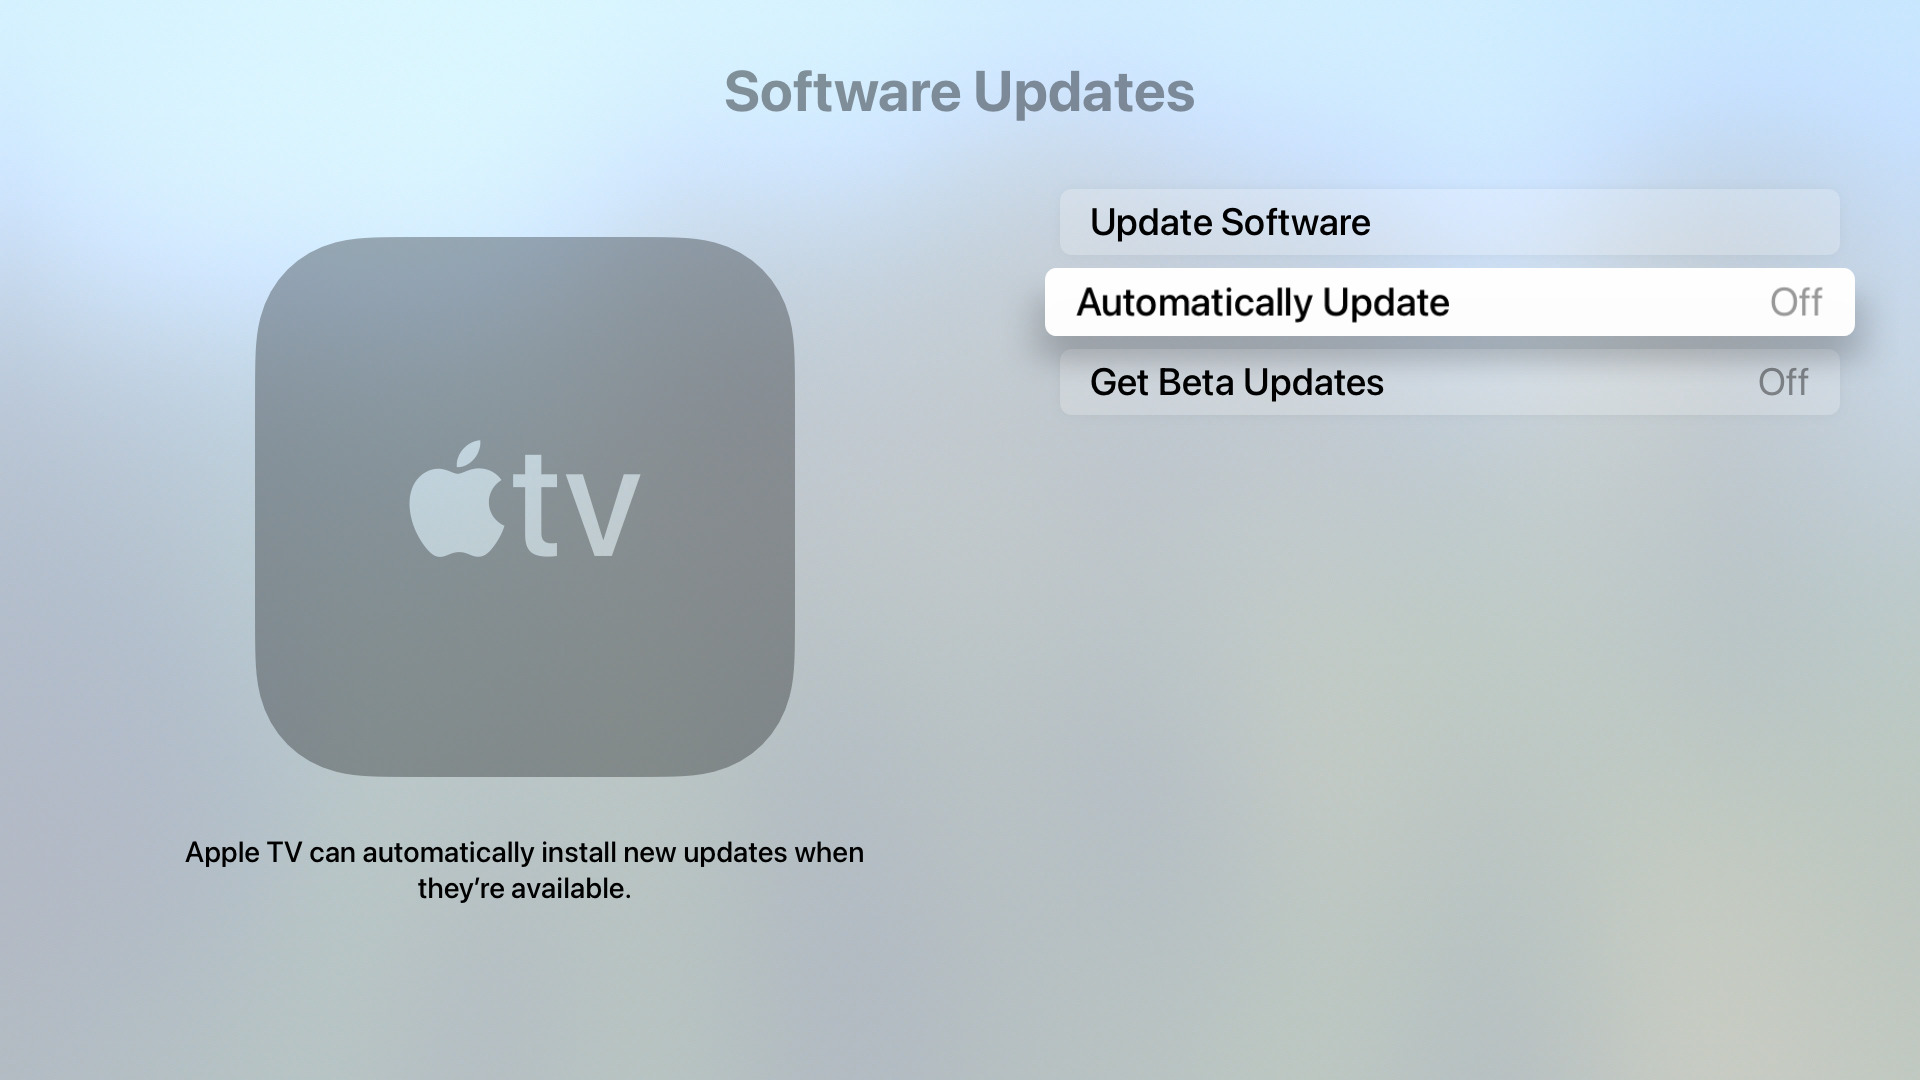 Apple TV disabled automatic updates